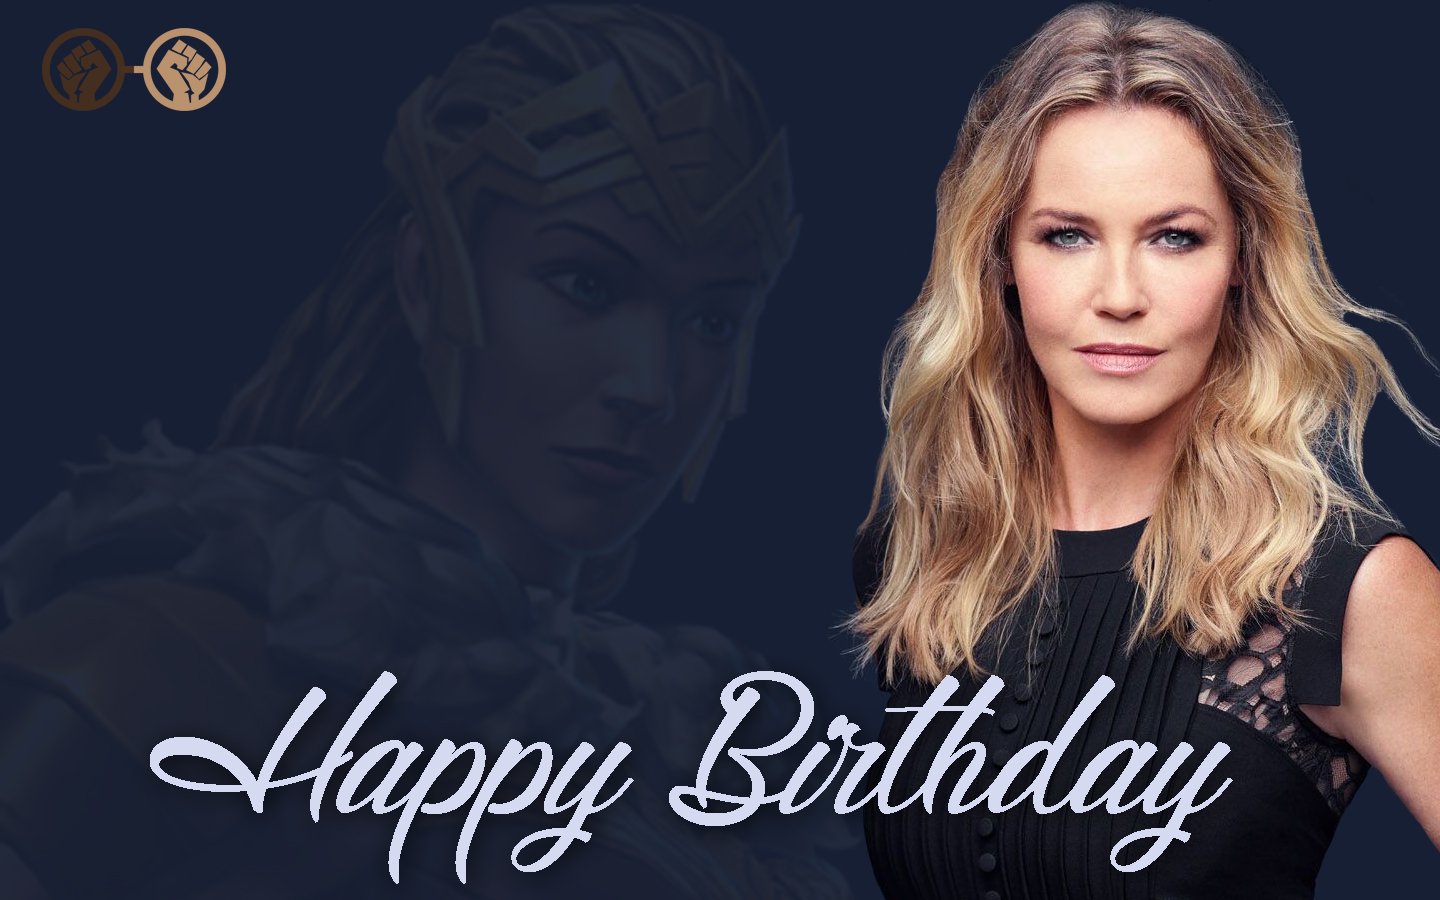 Happy birthday to our Queen Hippolyta, Connie Nielsen. The talented actress turns 53 today! 